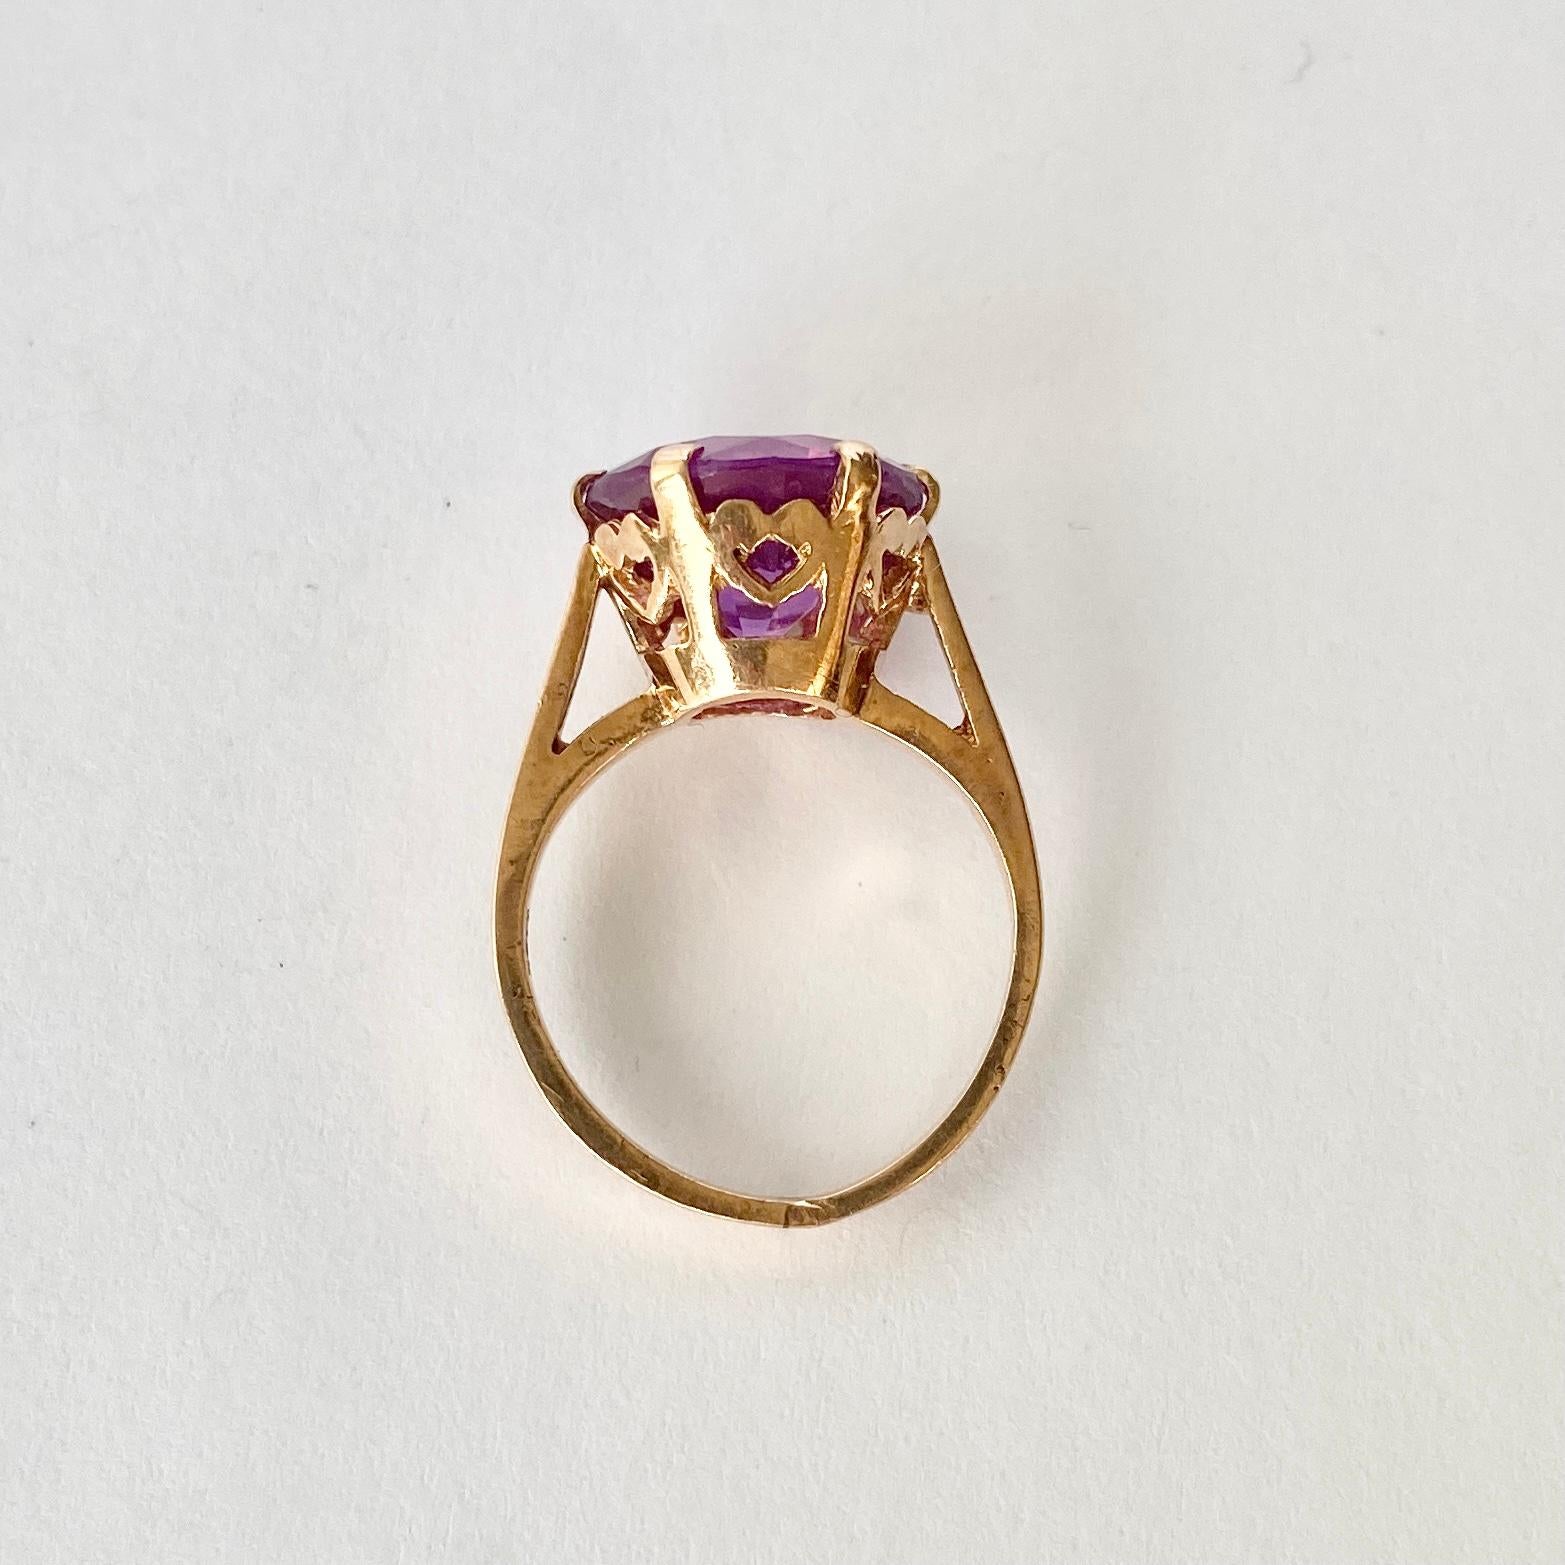 This sweet ring holds a round pink topaz which is perched up high on a heart gallery in simple claws. The ring is modelled in 9carat gold.

Ring Size: I 1/2 or 4 1/2 
Height Off finger: 8mm
Stone Diameter: 11.5mm

Weight: 3.8g